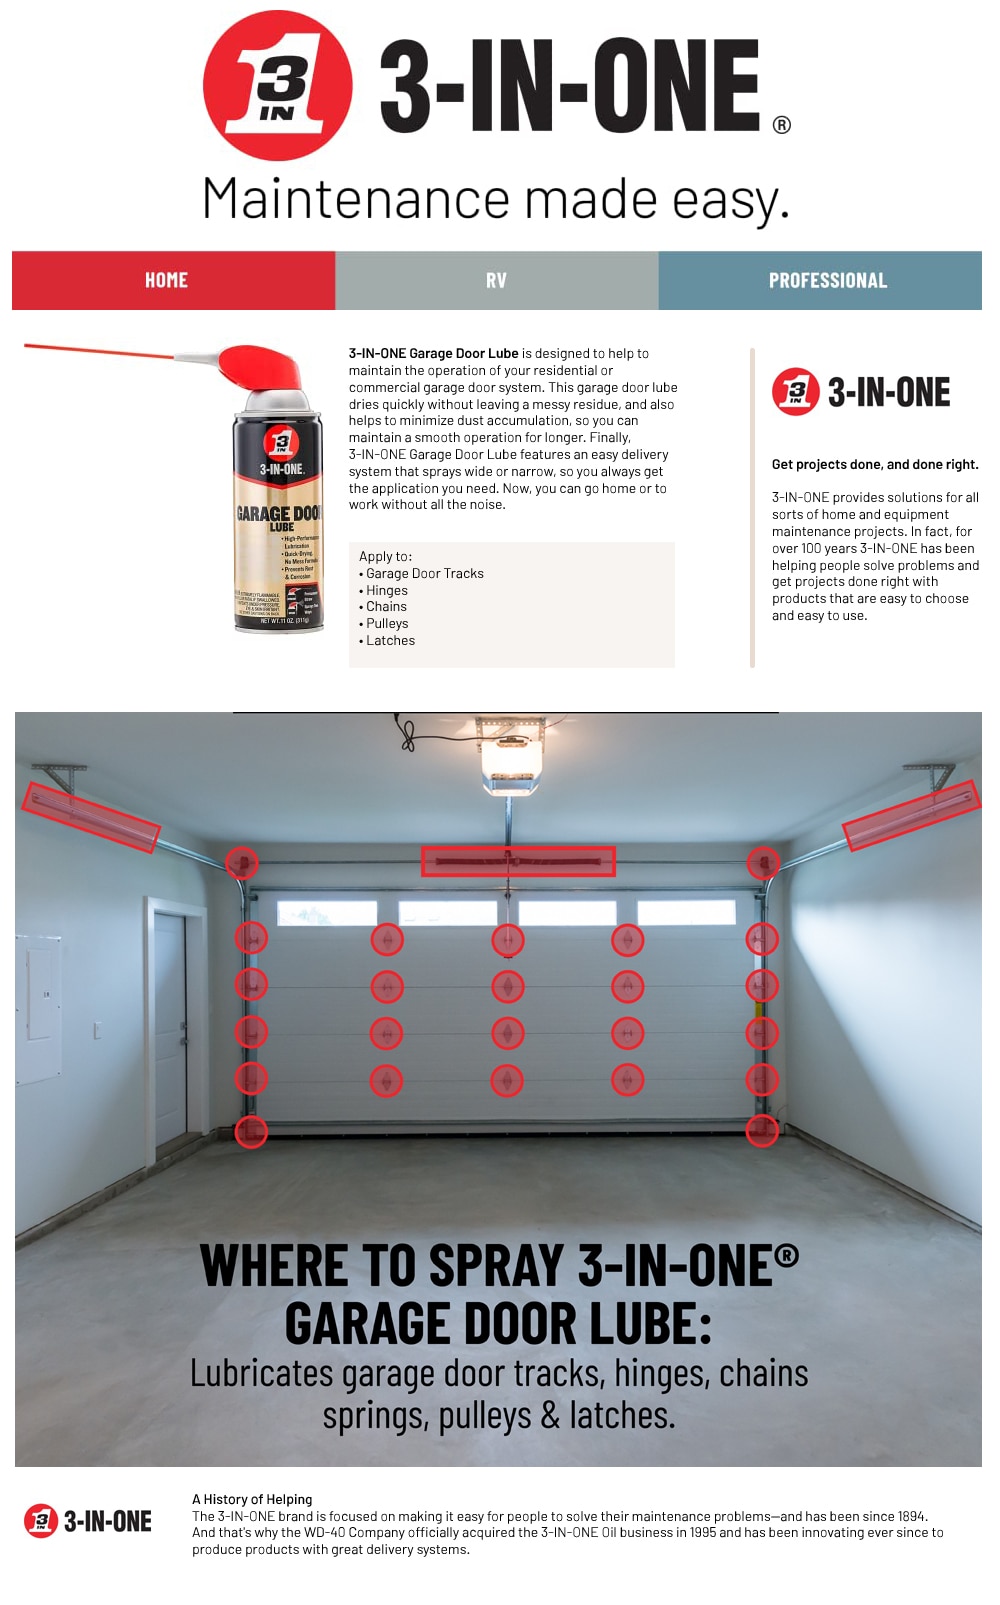 3-in-one silicone based garage door lubricant spray